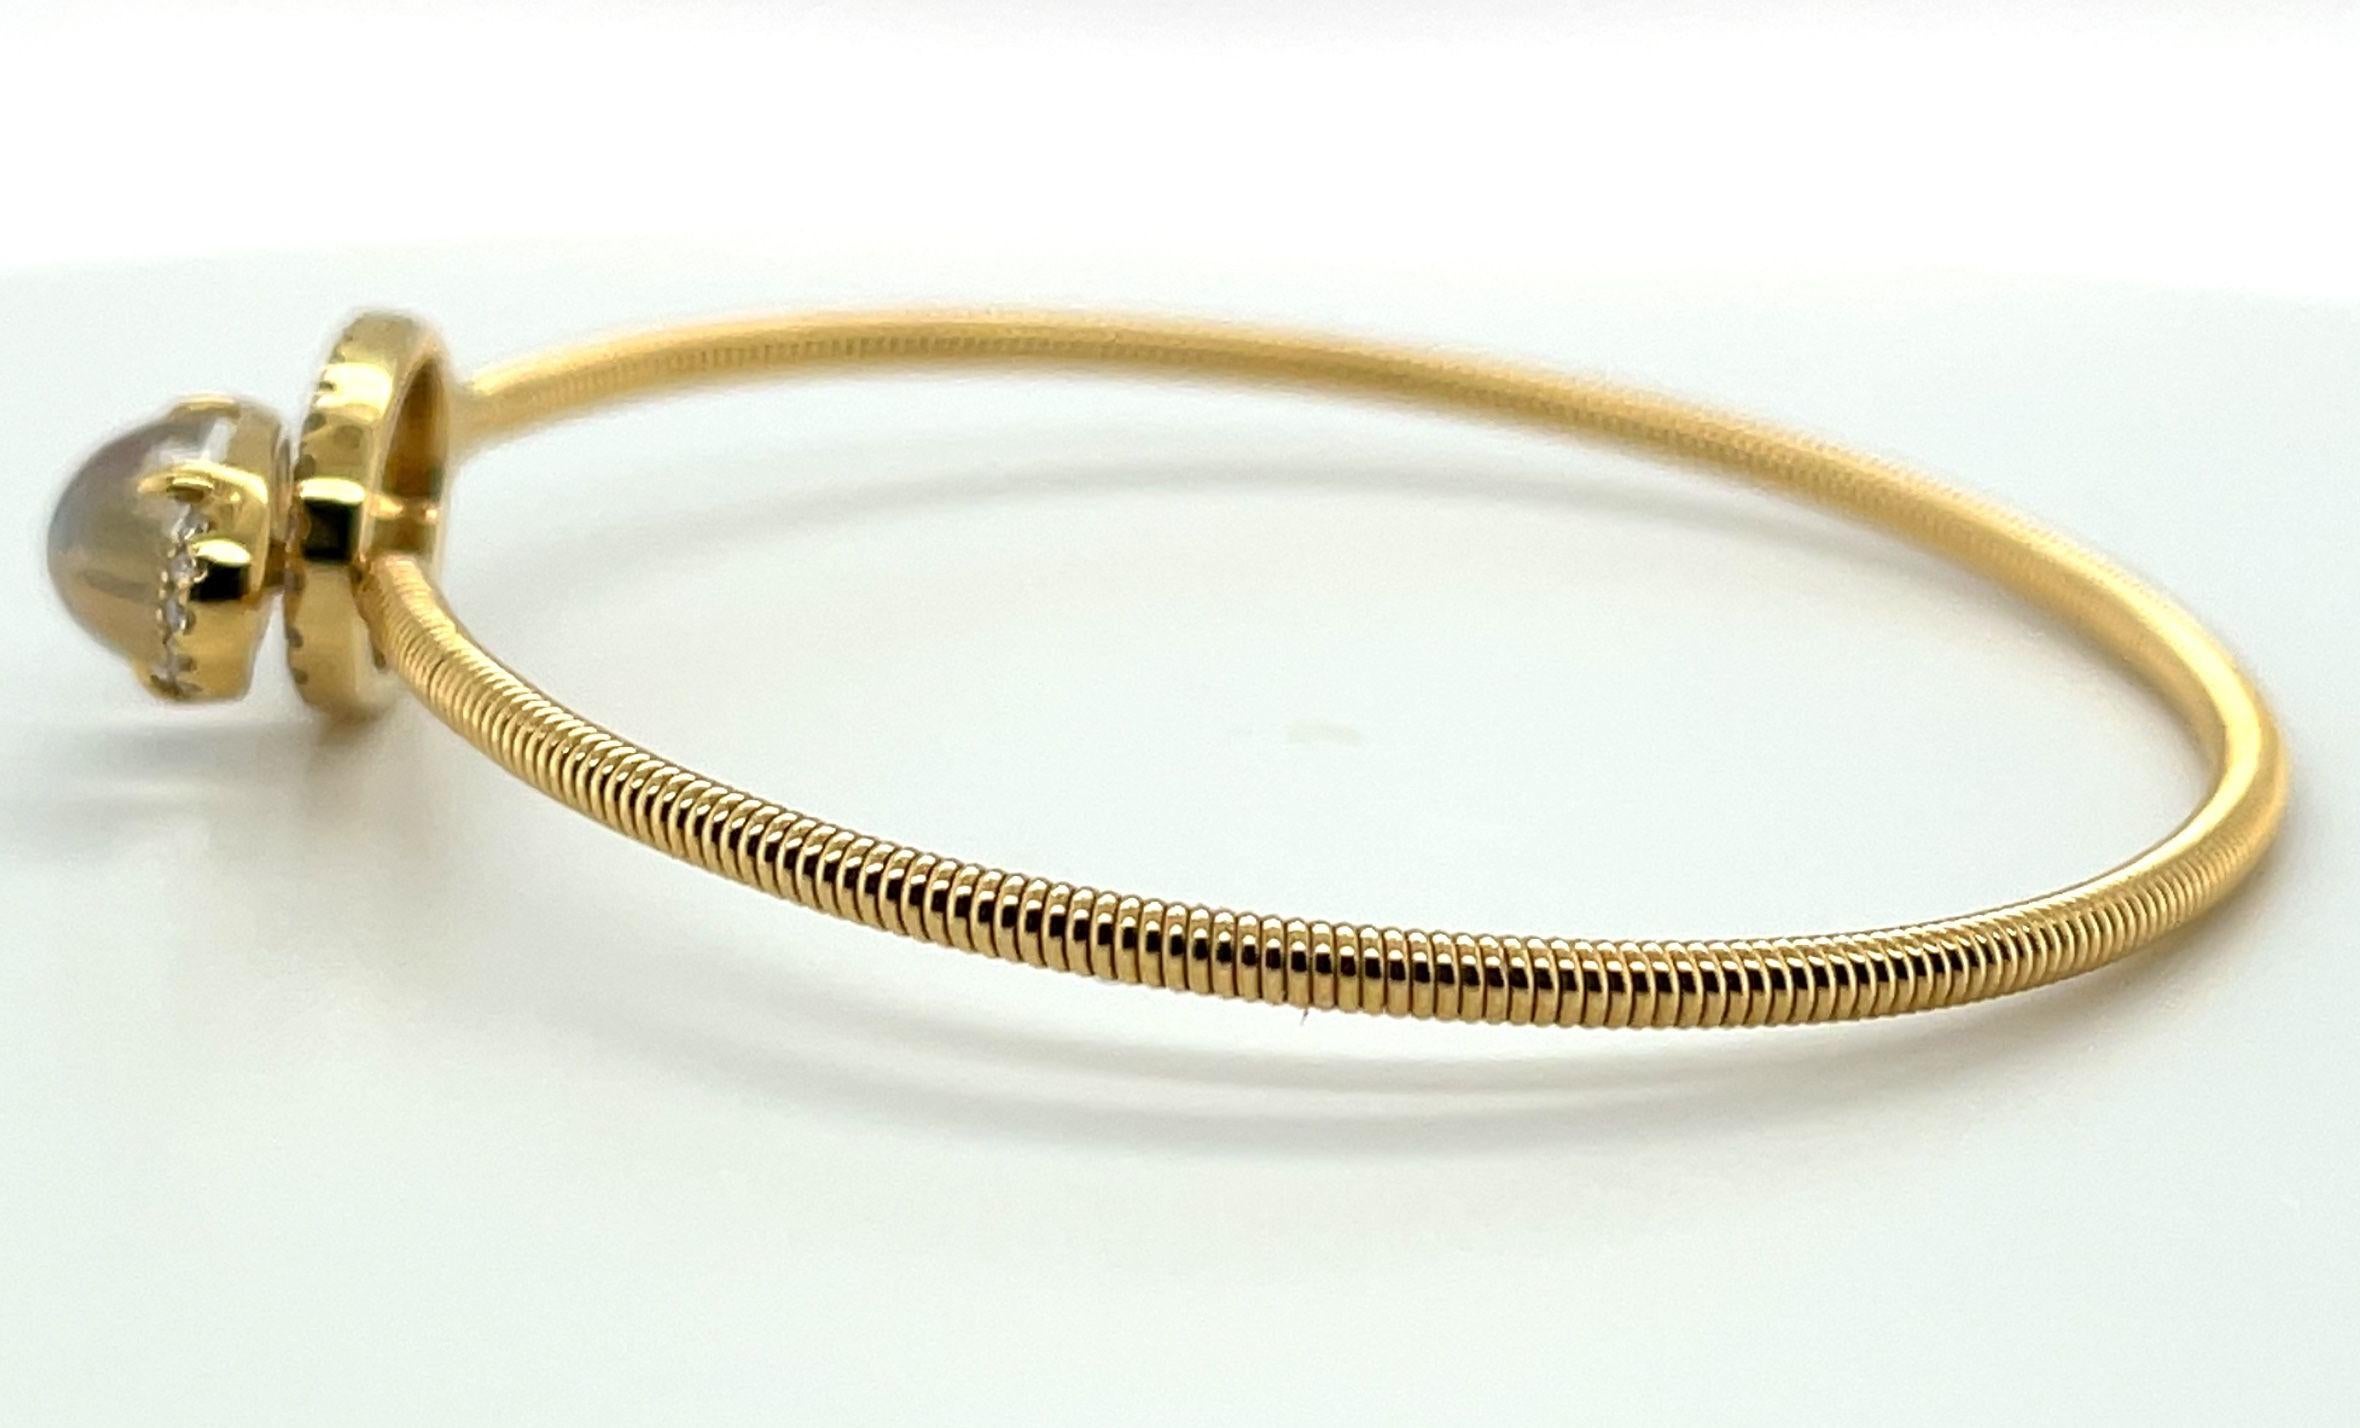 Oval Cut 2 Carat Moonstone Cabochon and Diamond Bangle Bracelet in Yellow Gold